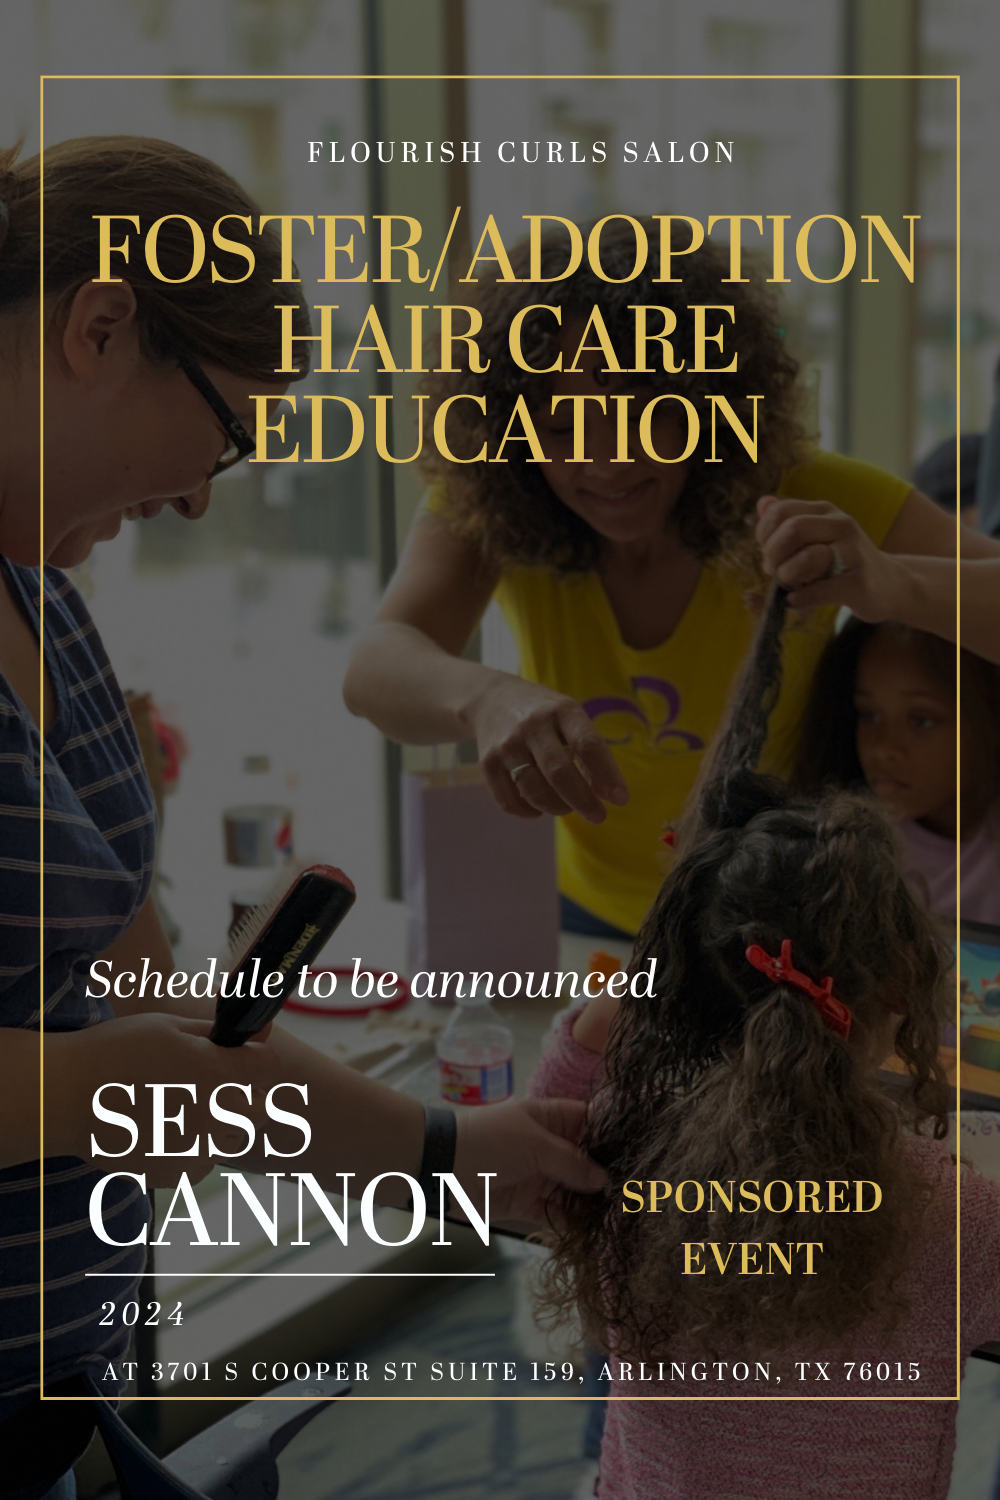 Foster/Adoption Hair Care Education